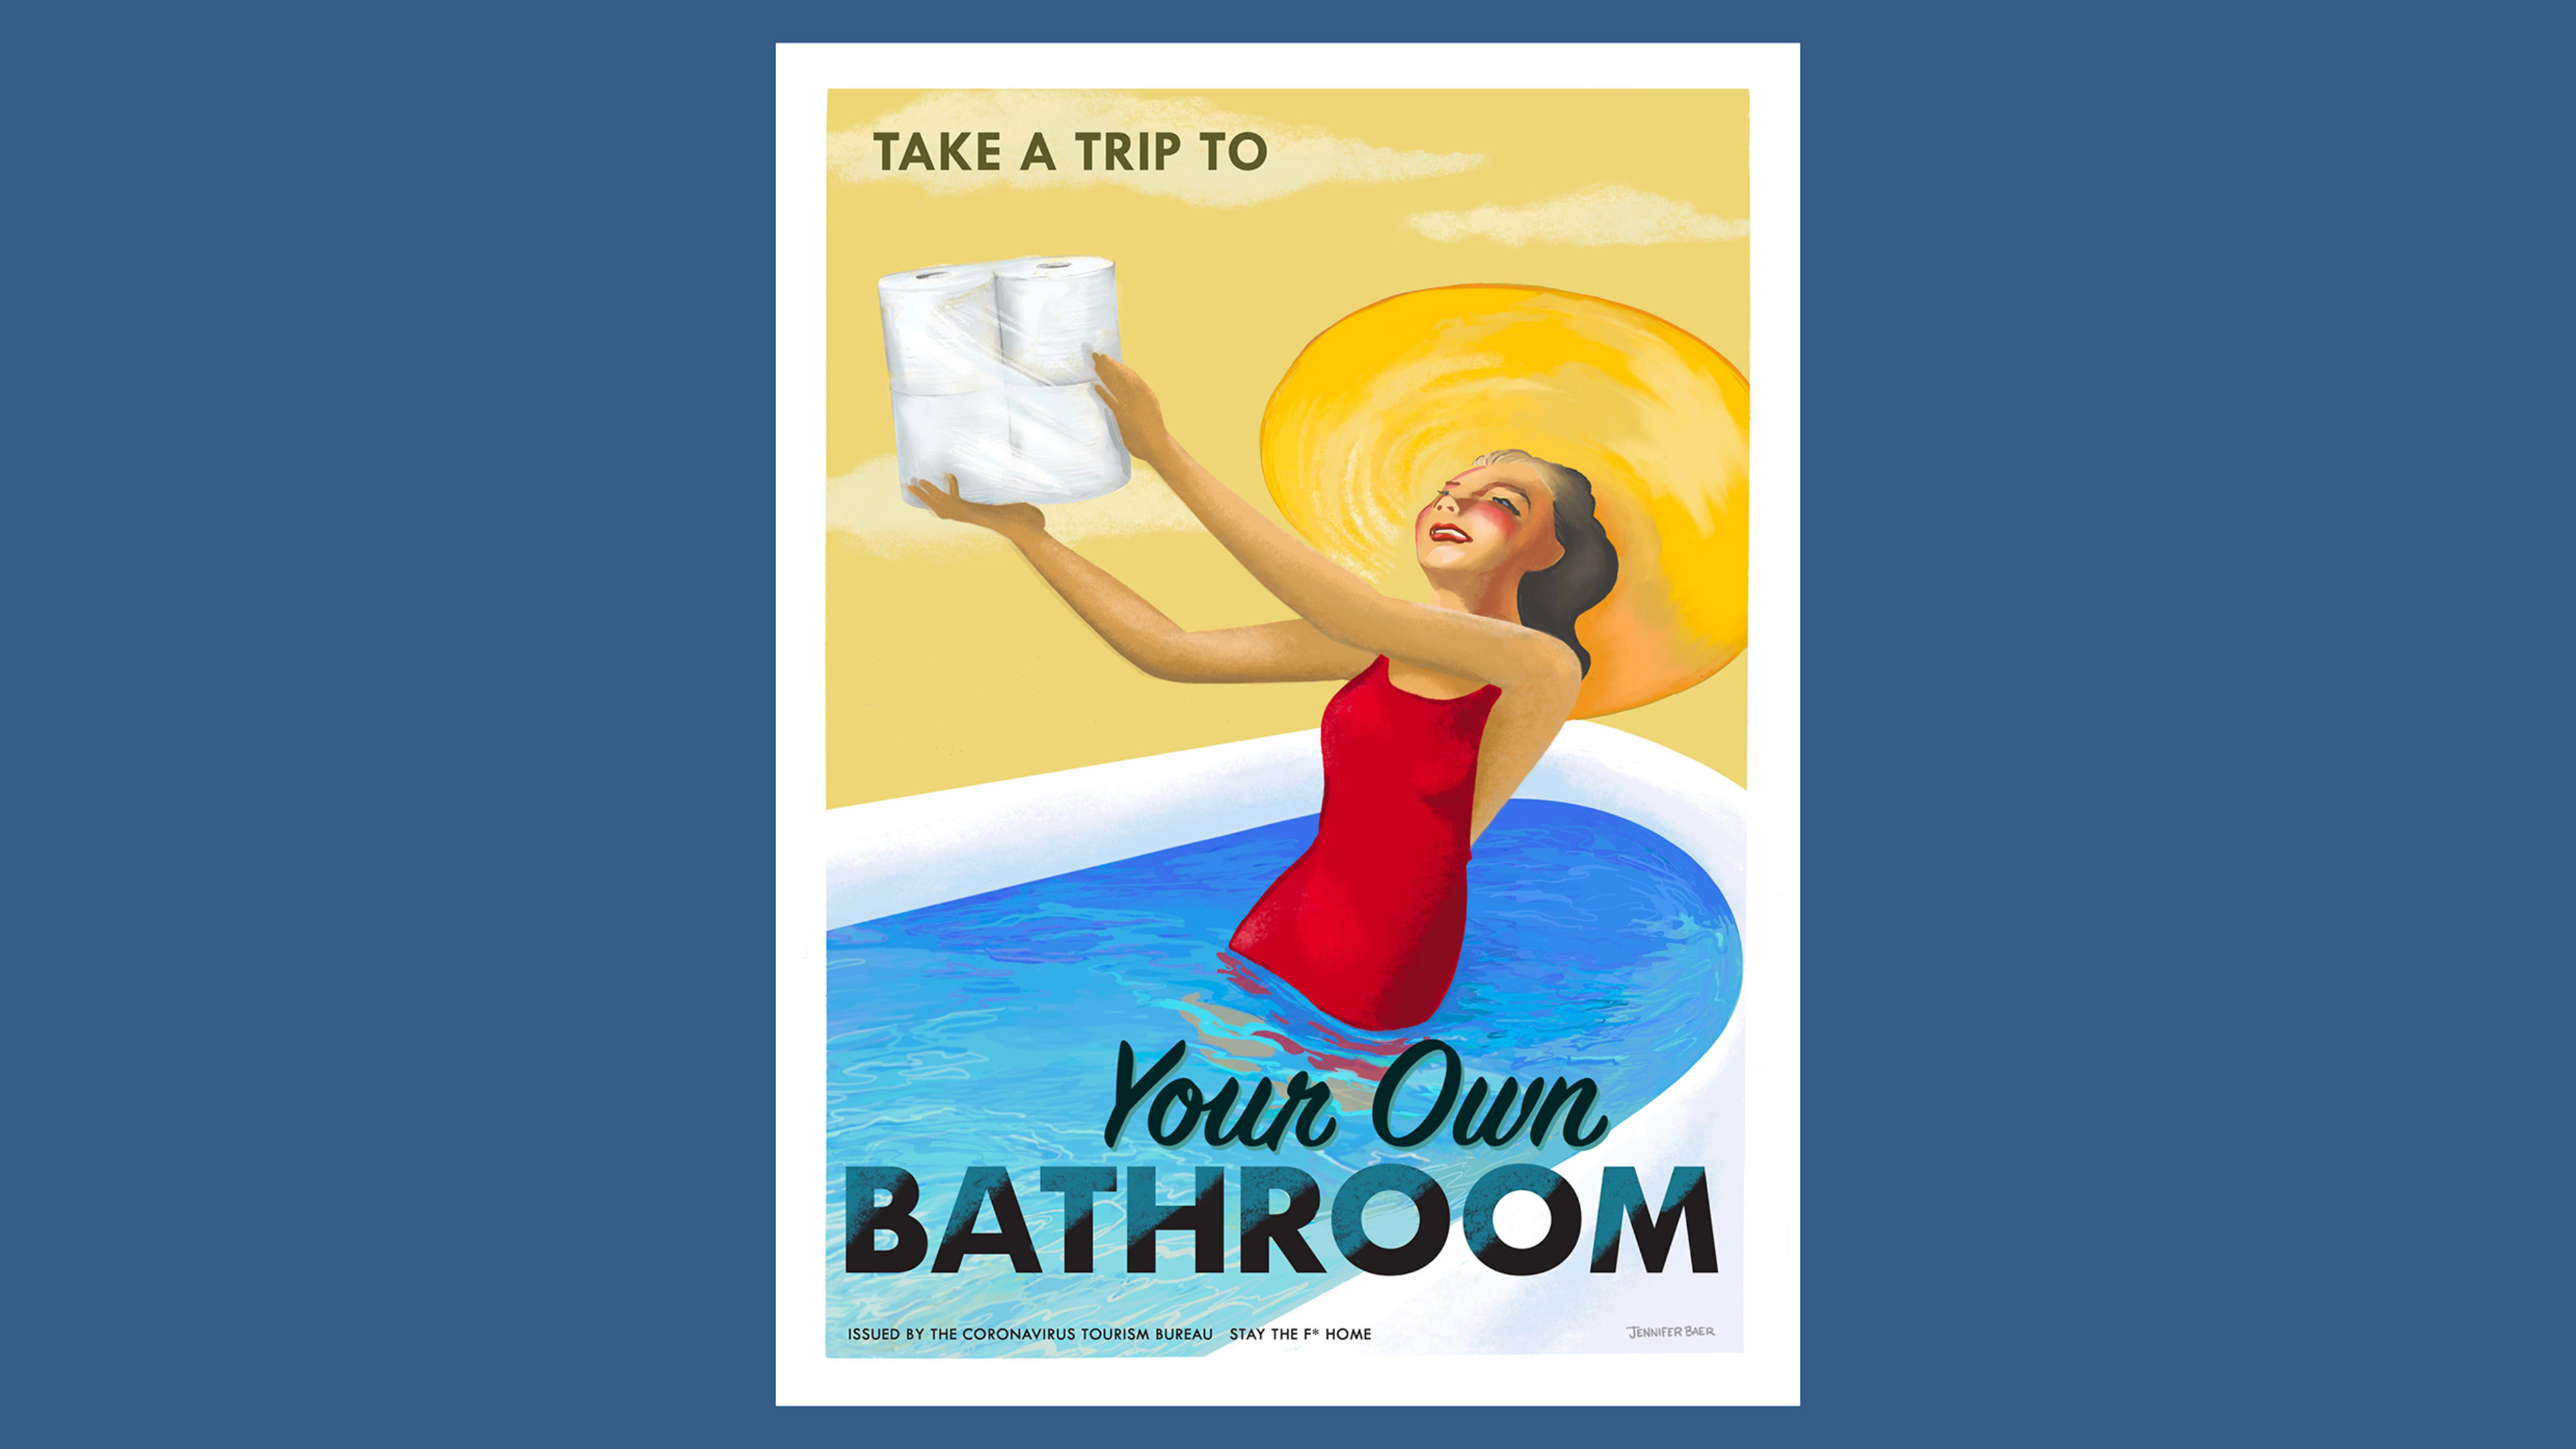 These vintage-inspired travel posters are selling today’s ultimate destination: home